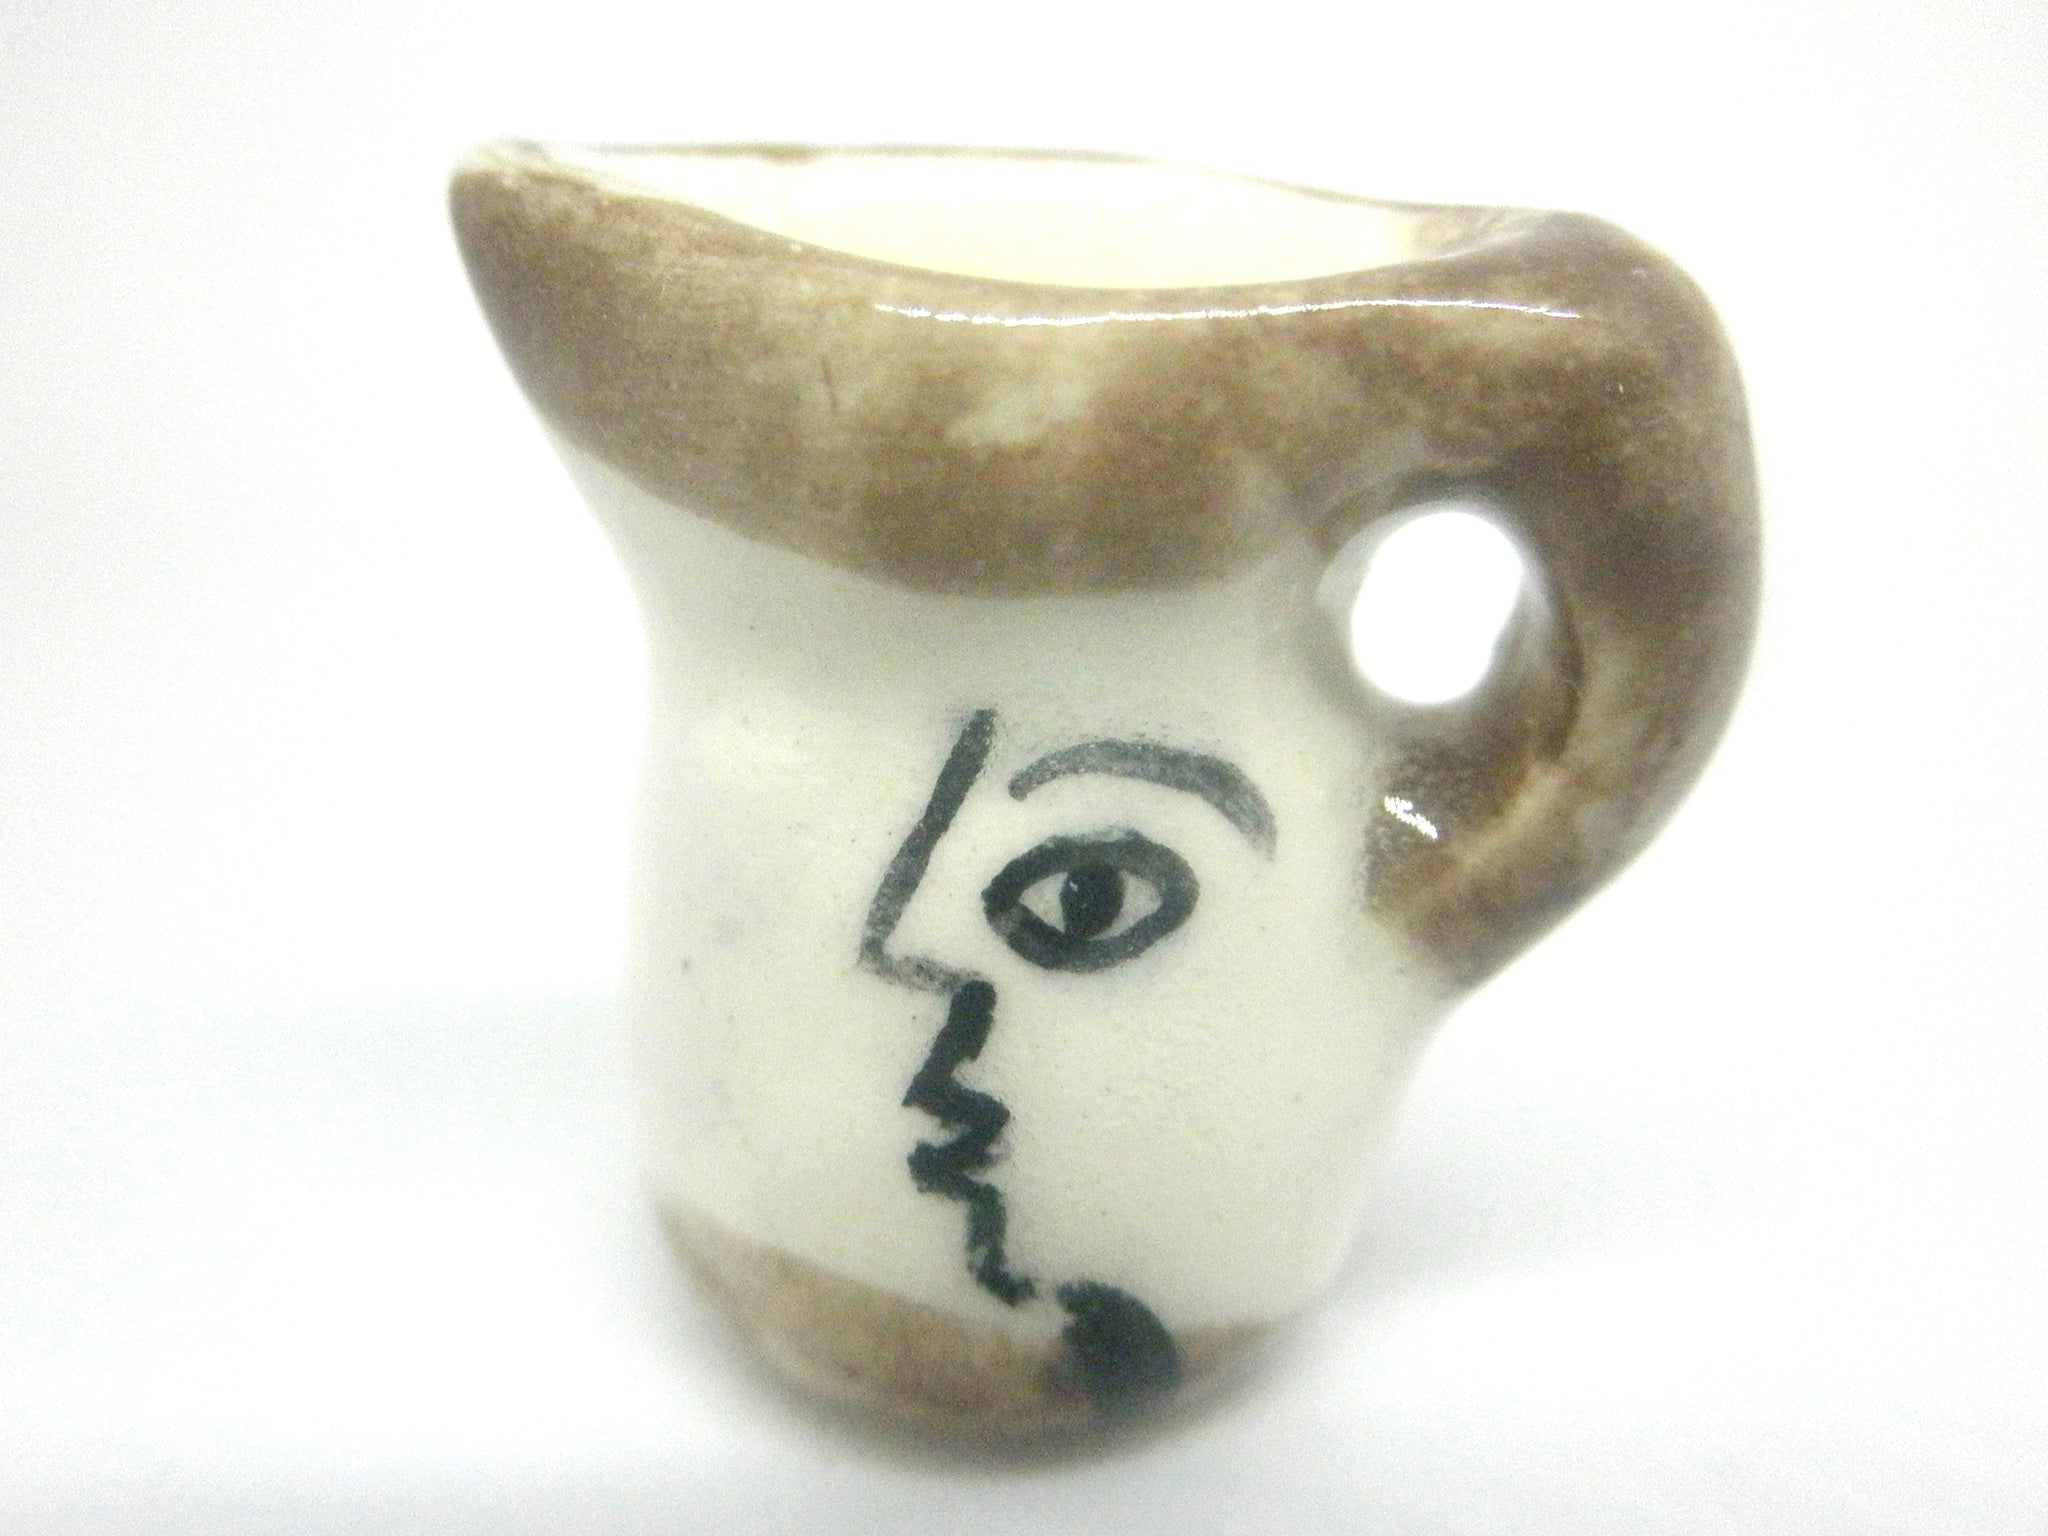 Miniature Picasso inspired pitcher - Profile